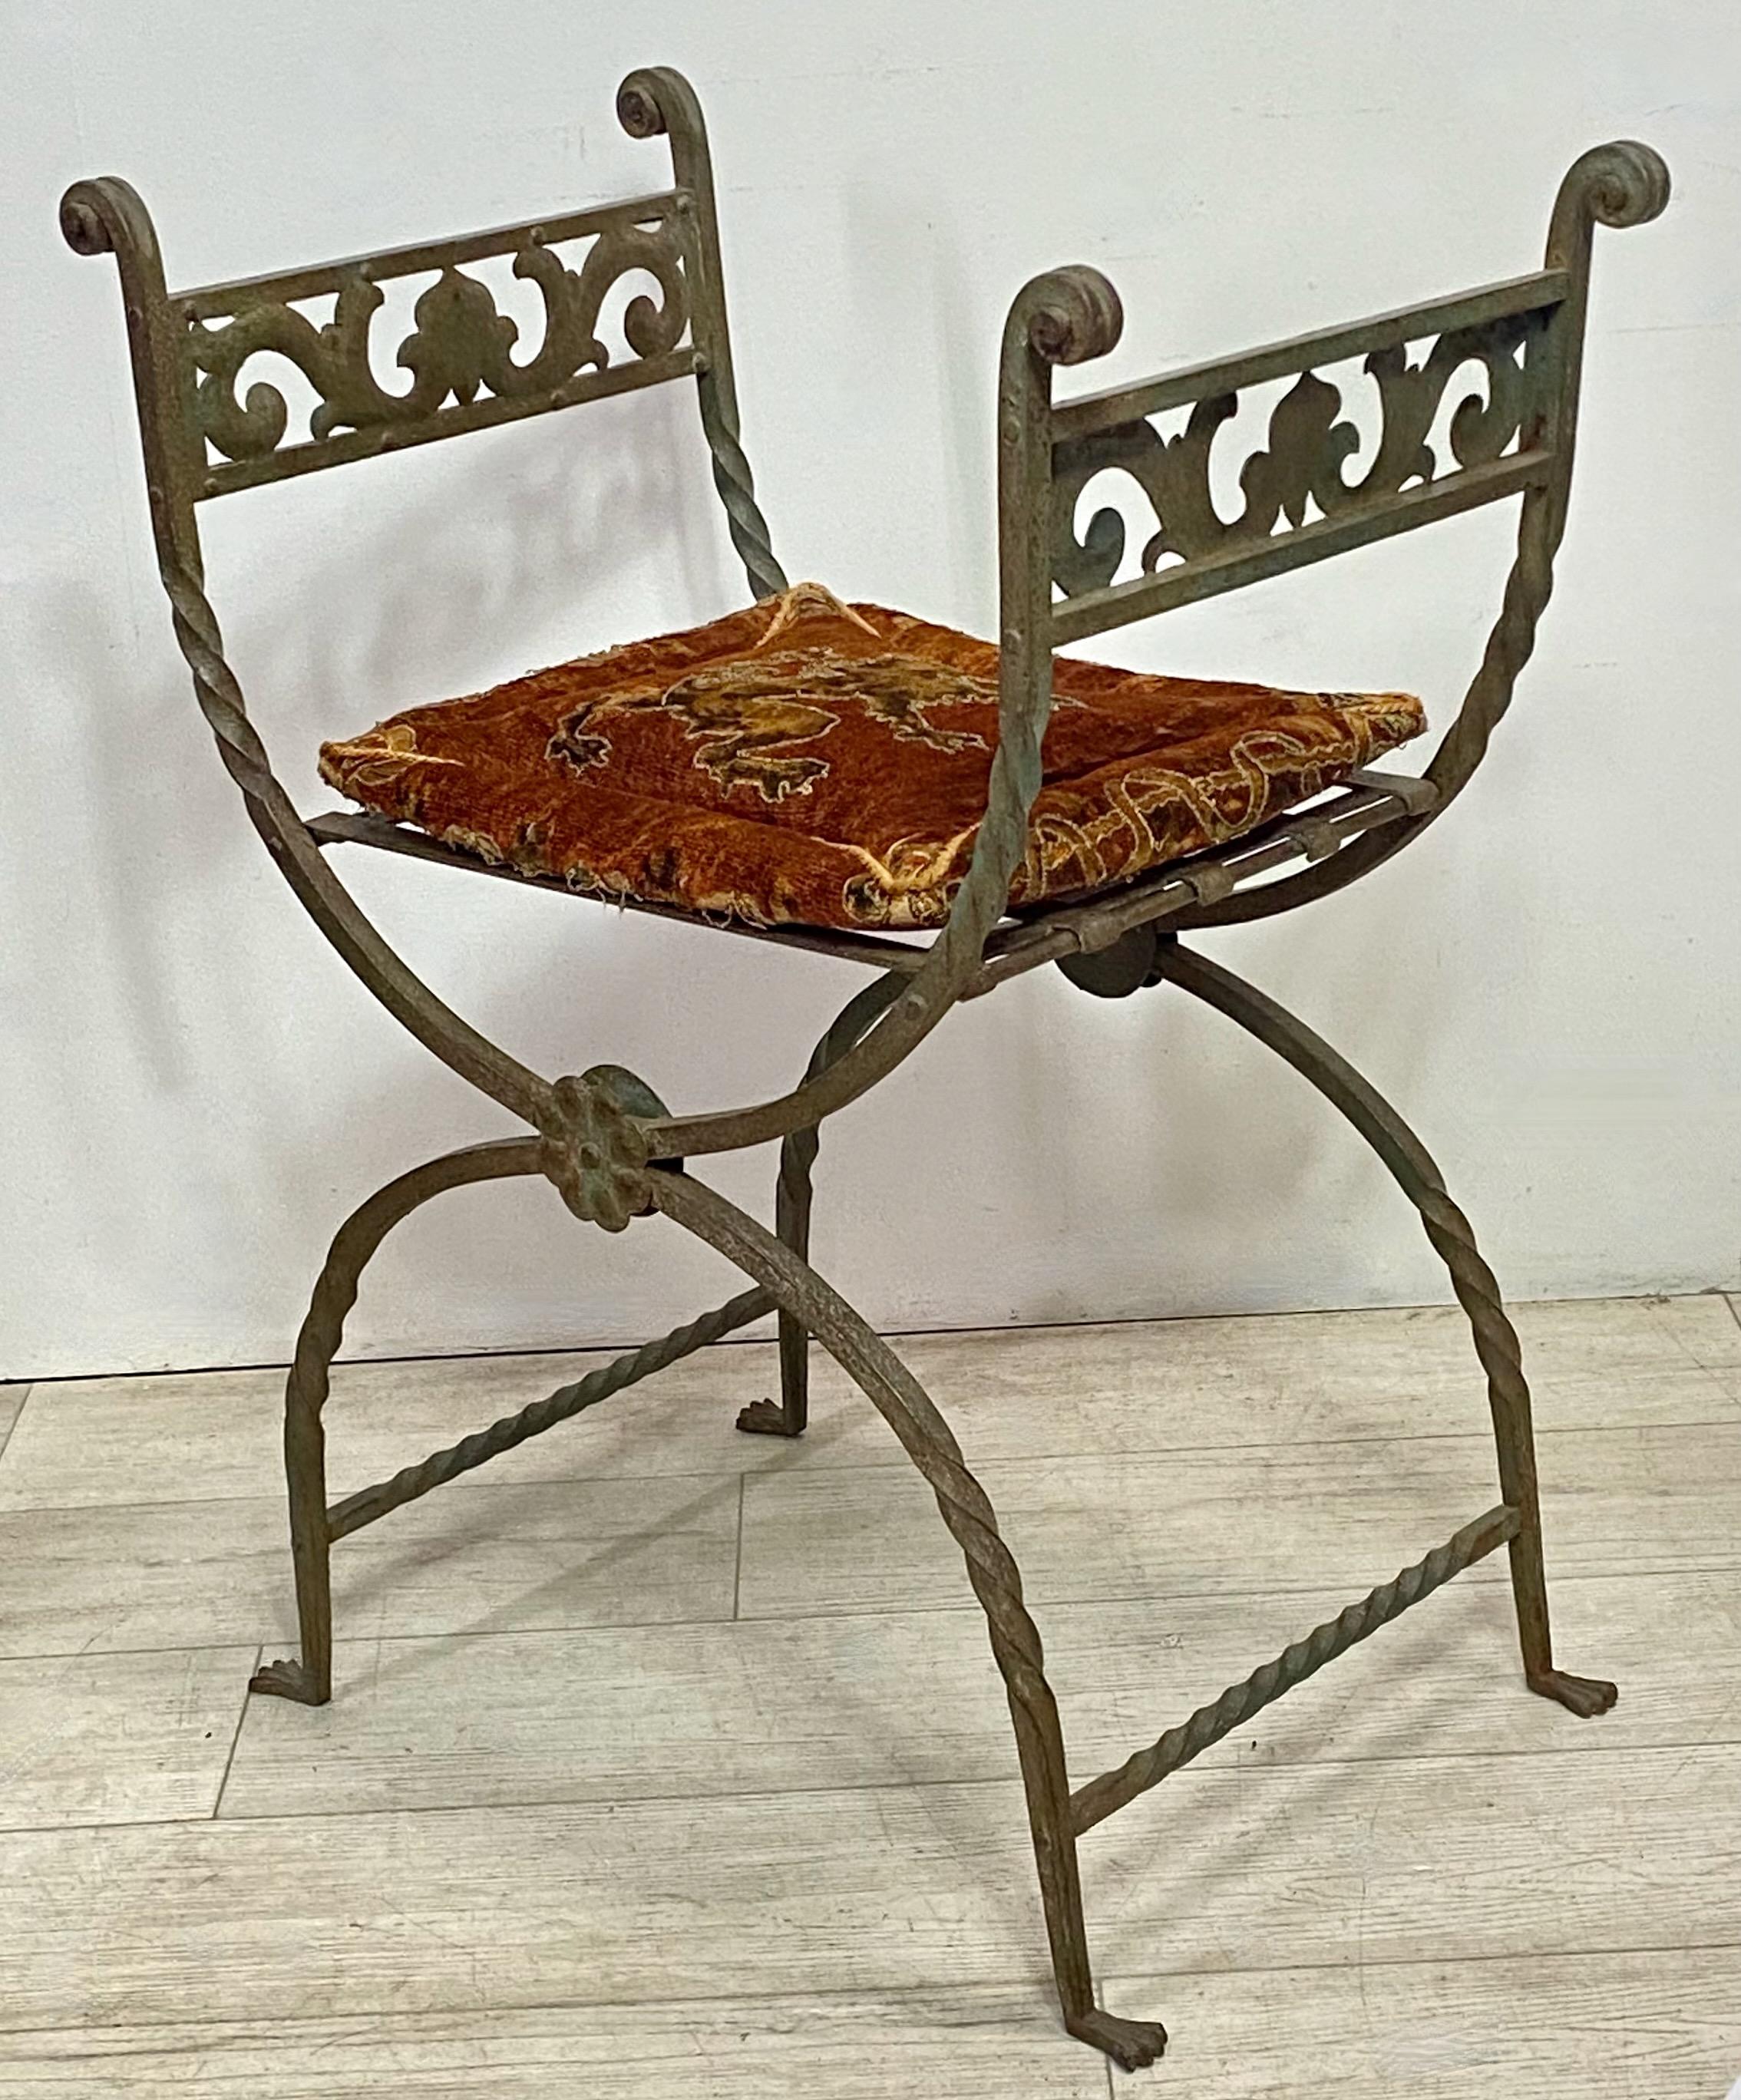 Beautifully hand crafted wrought iron Curule or Savonarola style chair or stool with original patinated green paint and original velvet cushion with lion appliqué.
Very good quality and in excellent condition.
Italy, 19th century.